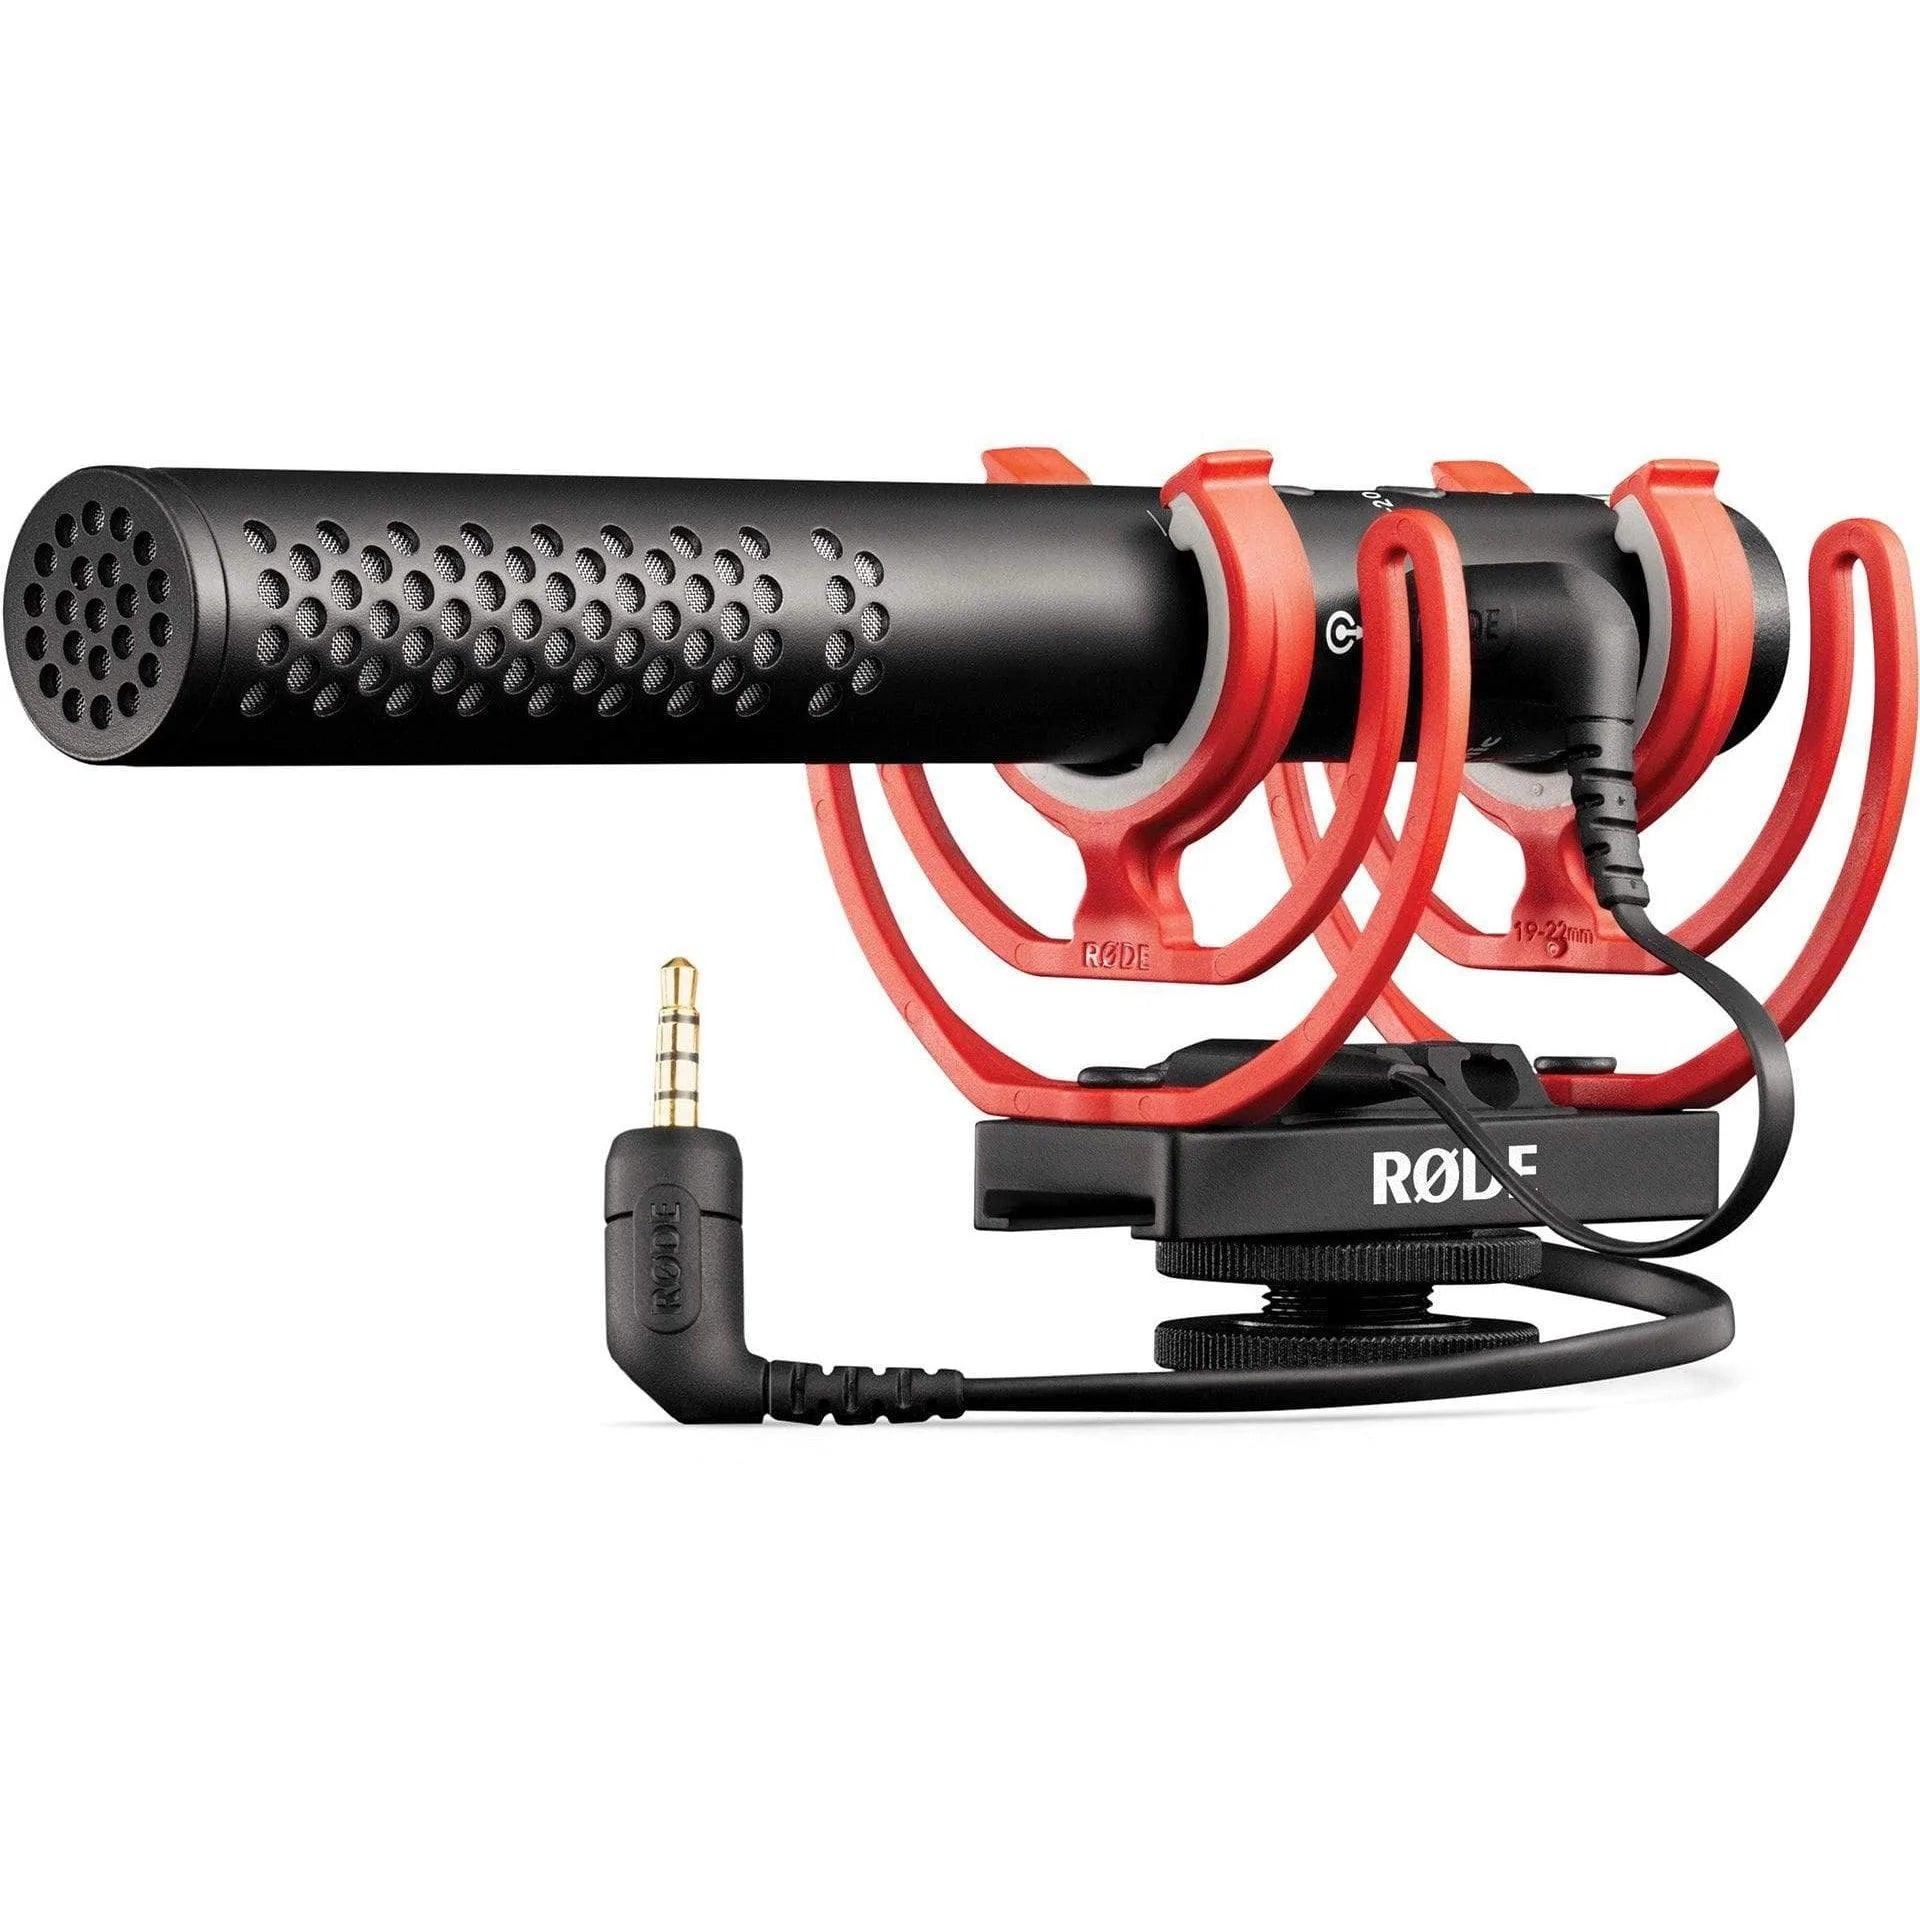 Buy Rode NTG5 Location Recording Microphone Kit at Best Price on